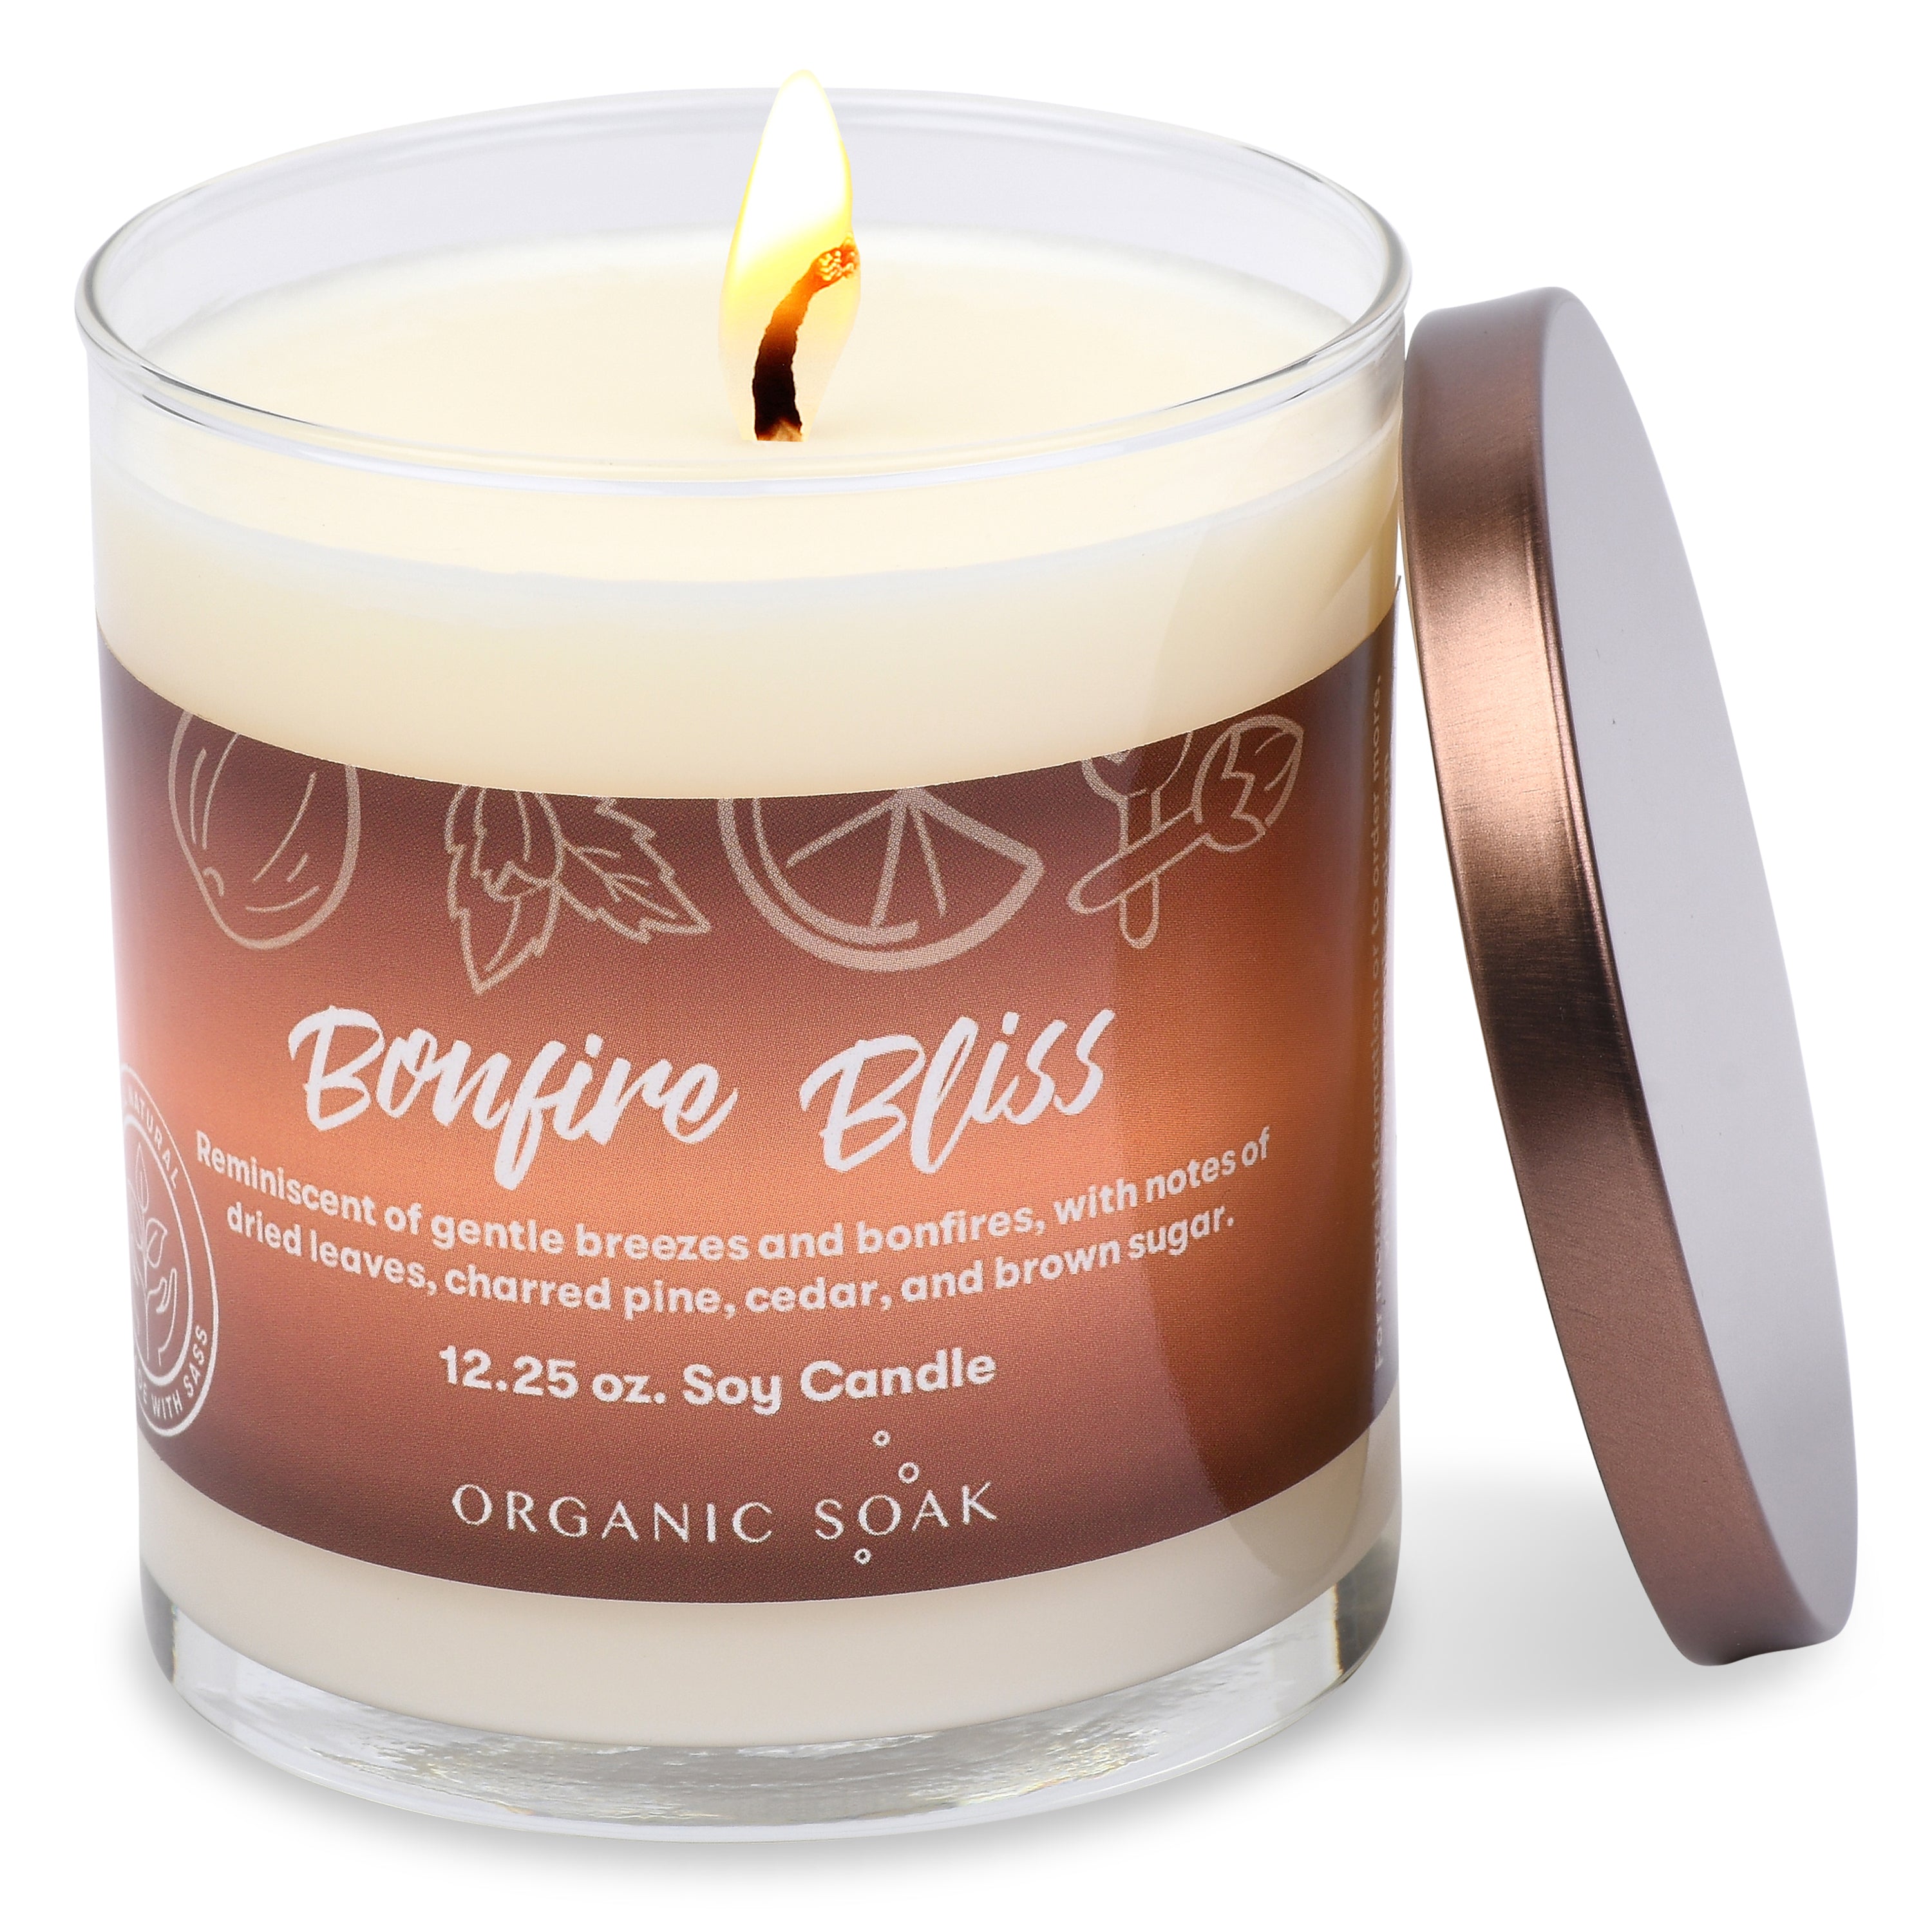 Bonfire Bliss Scented Soy Candle